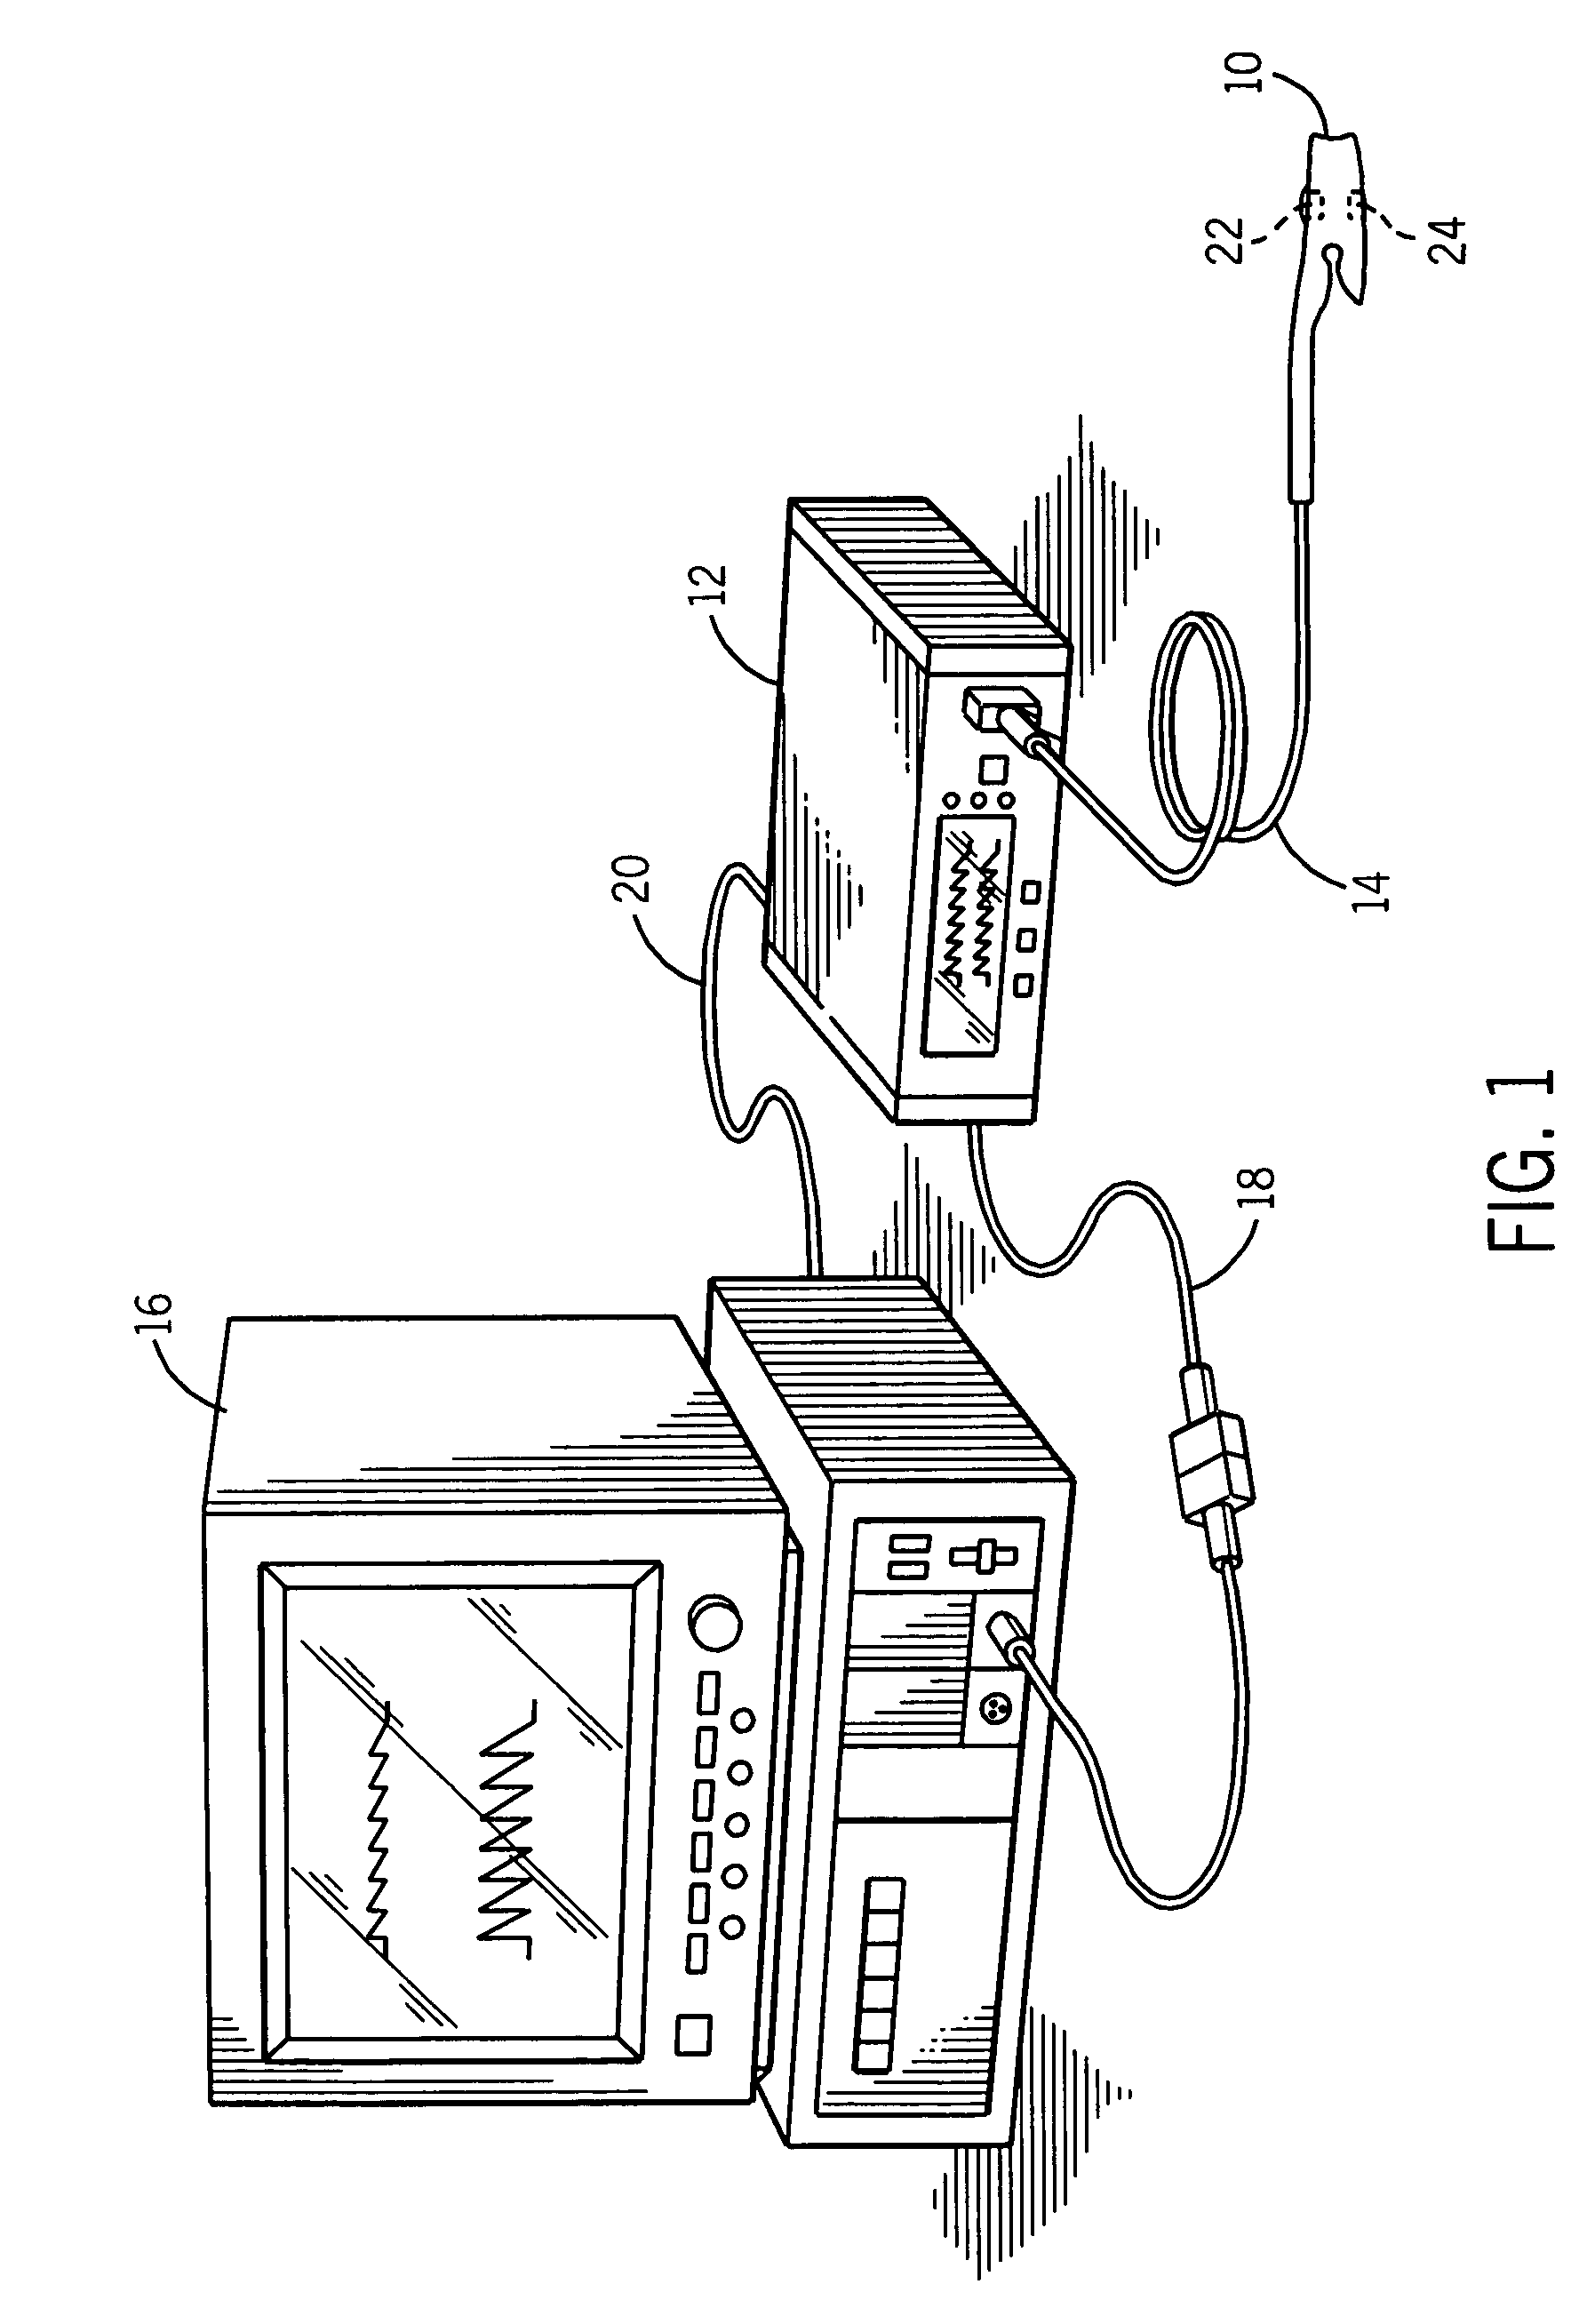 Compliant diaphragm medical sensor and technique for using the same